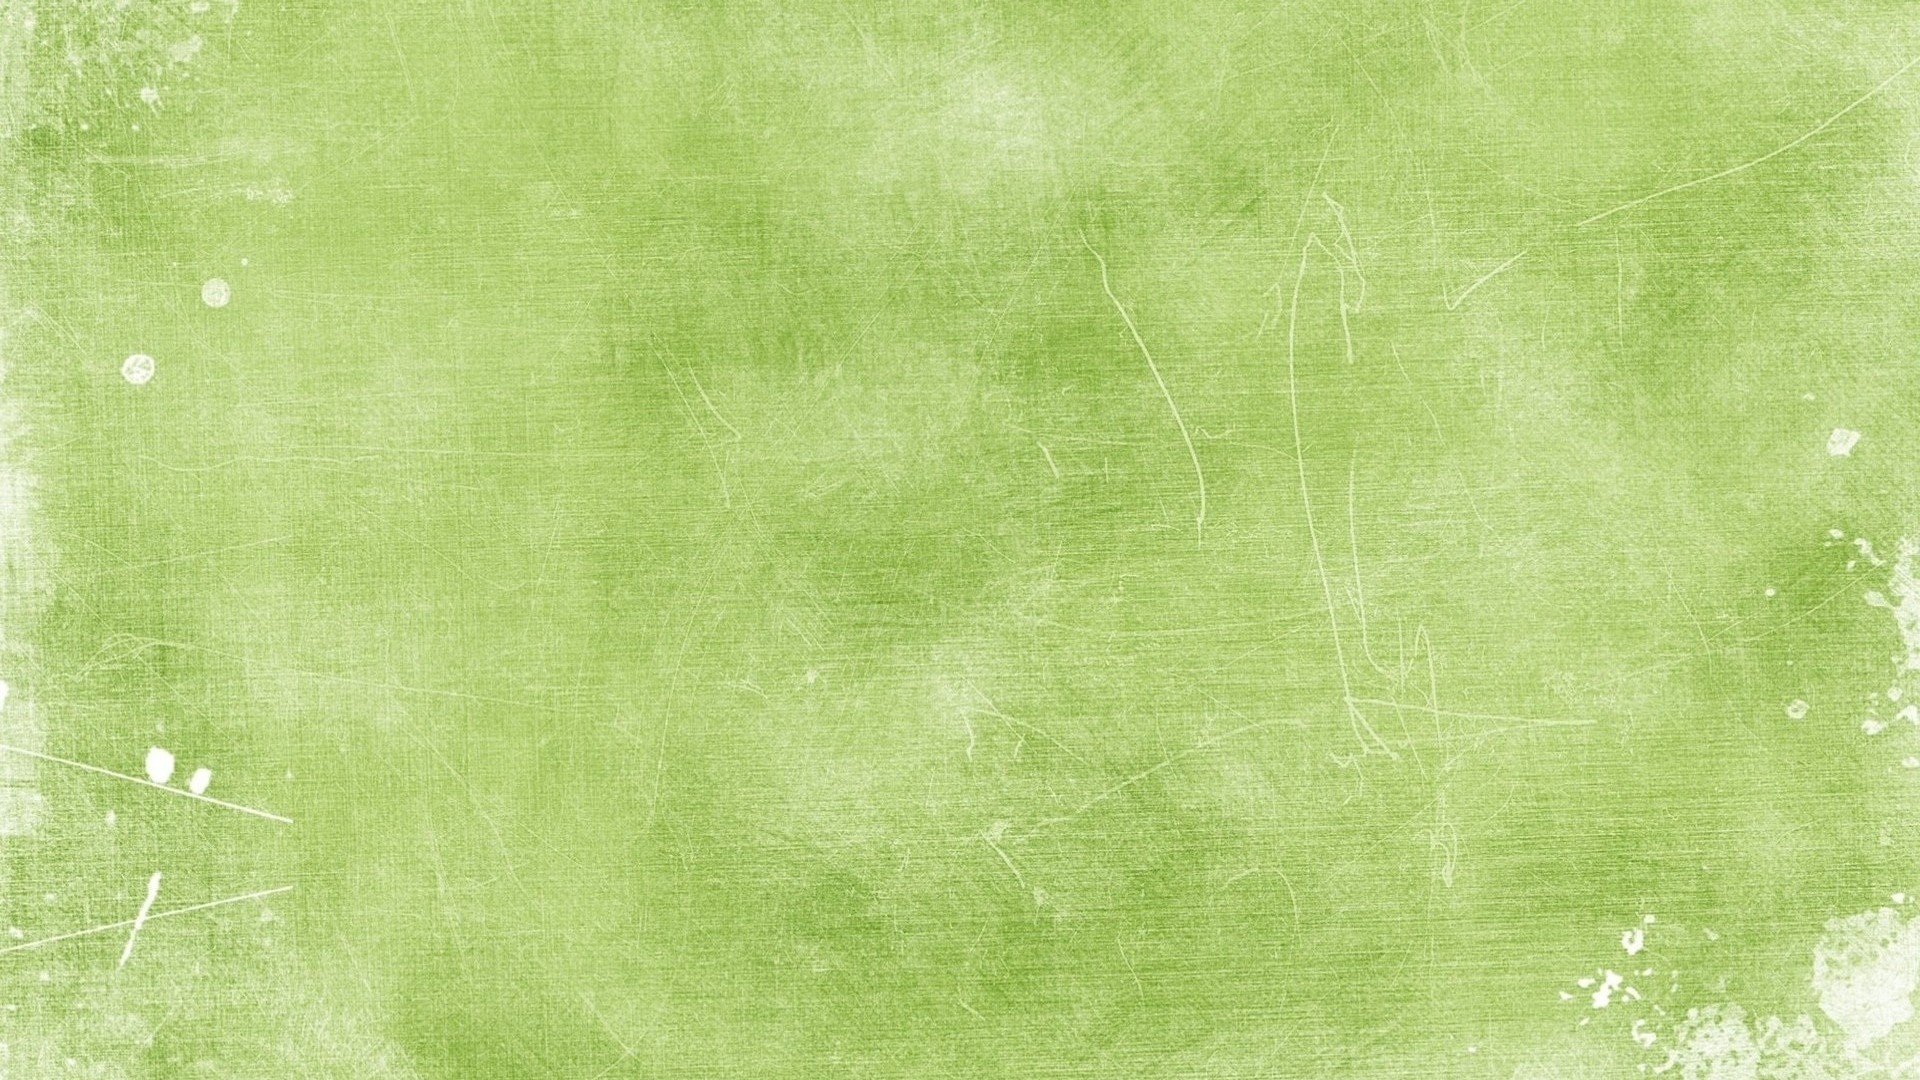 1920x1080 stains, light, background - http://www.wallpapers4u.org/